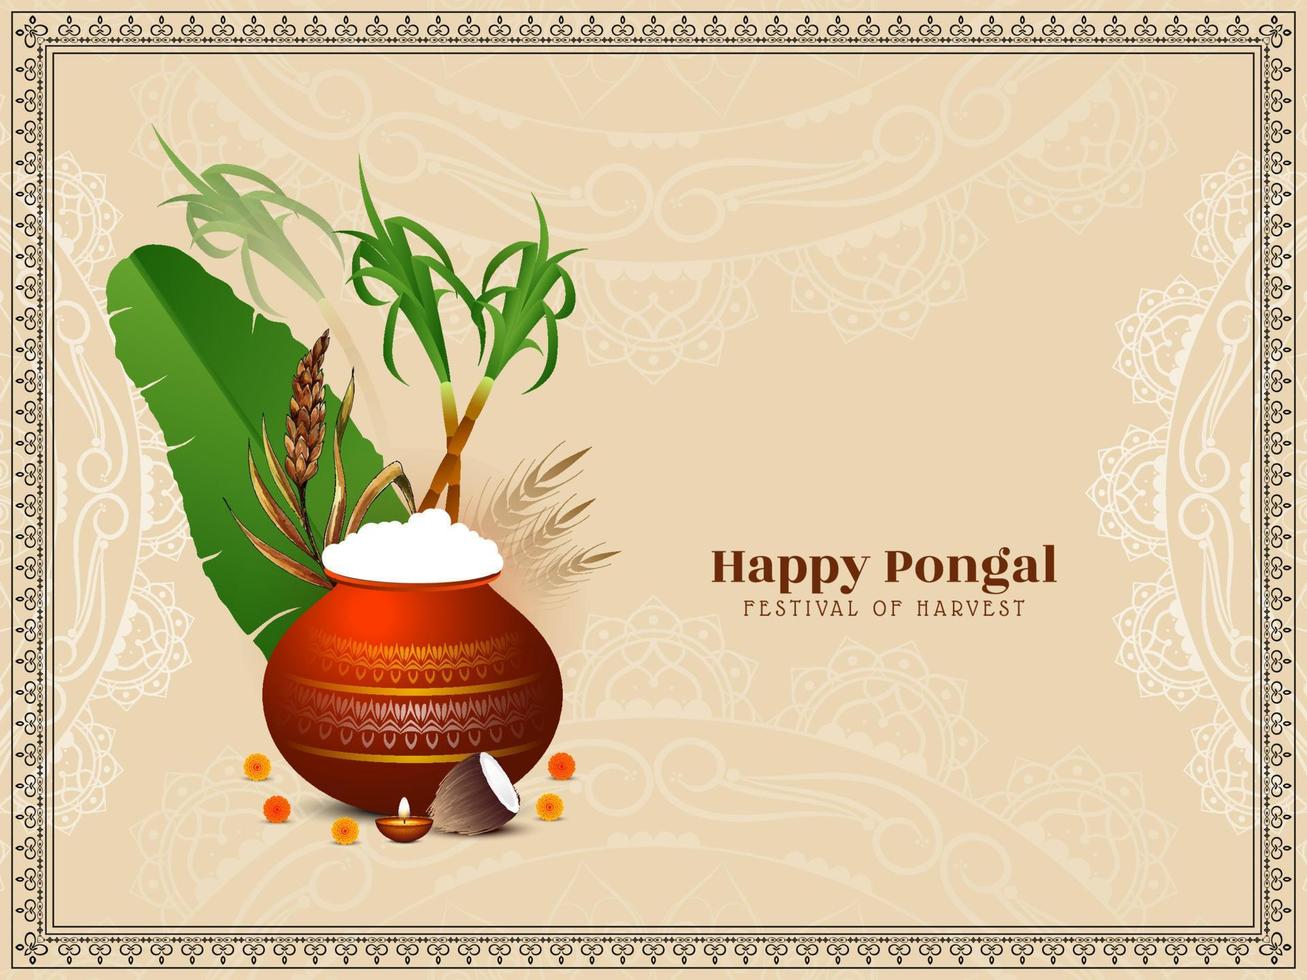 Happy Pongal south Indian cultural festival background vector